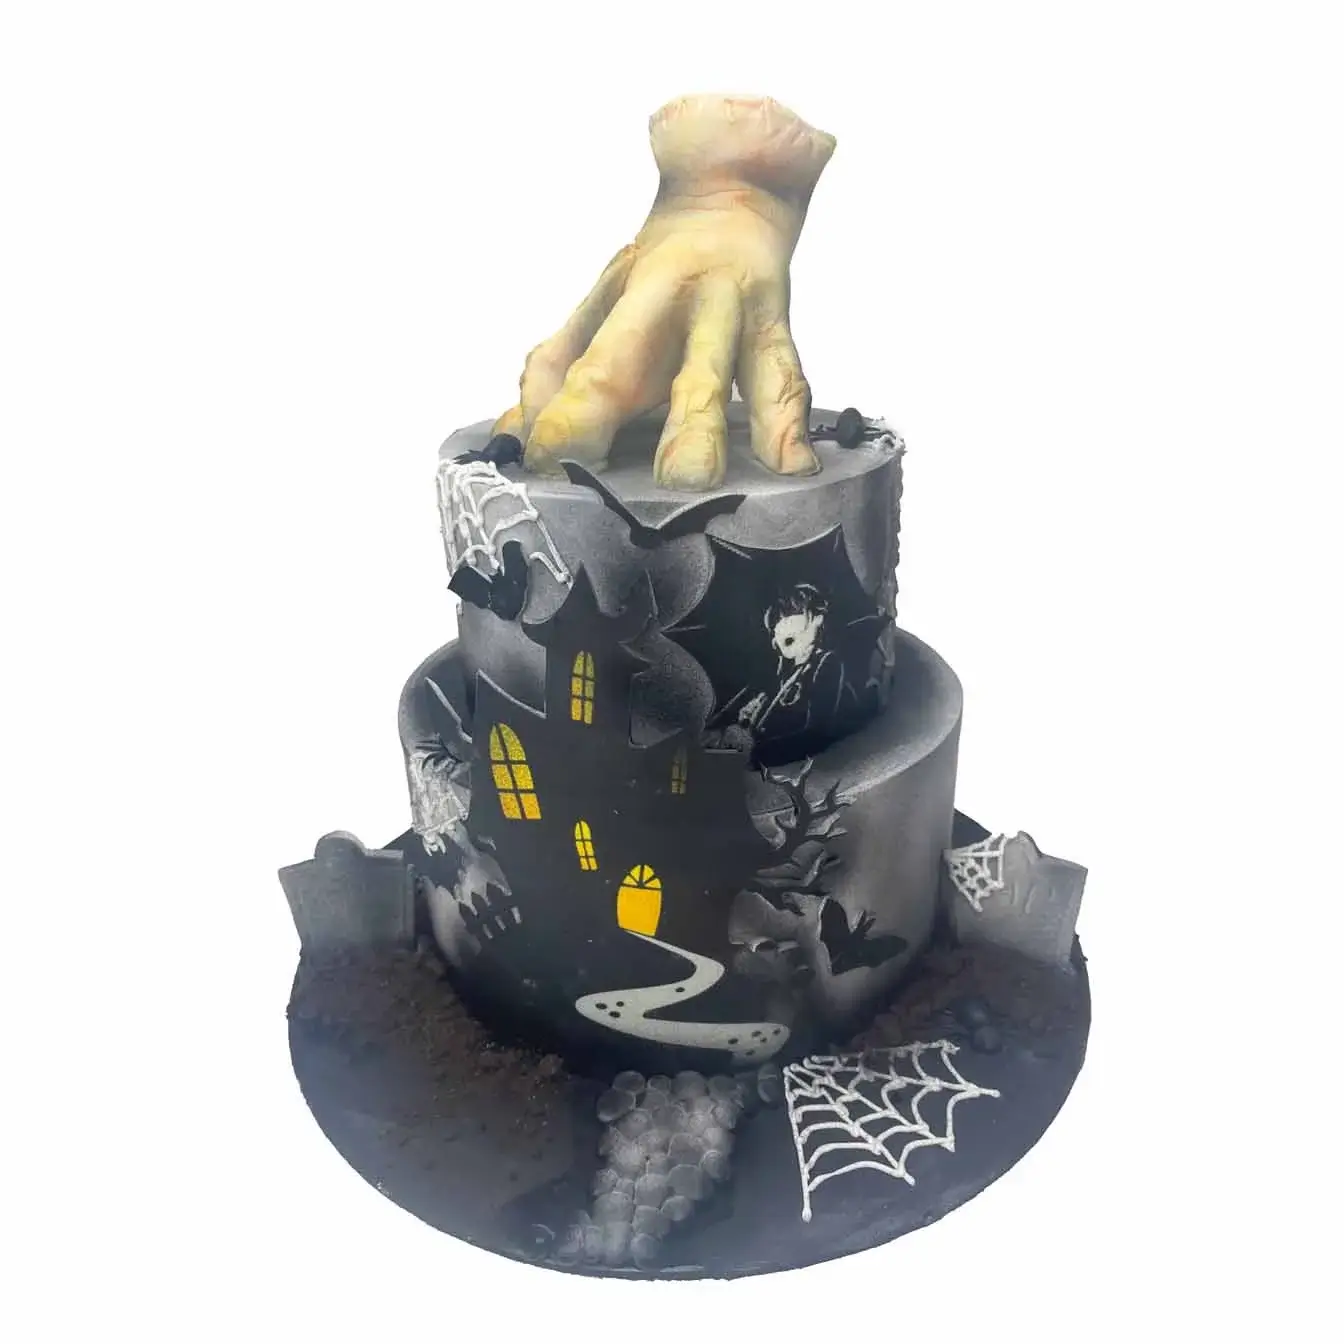 Wednesday's Spooky Mansion Cake - A two-tier cake with a molded hand, edible image haunted house, tombstones, and eerie details, a bewitching centerpiece for fans of the dark and mysterious.